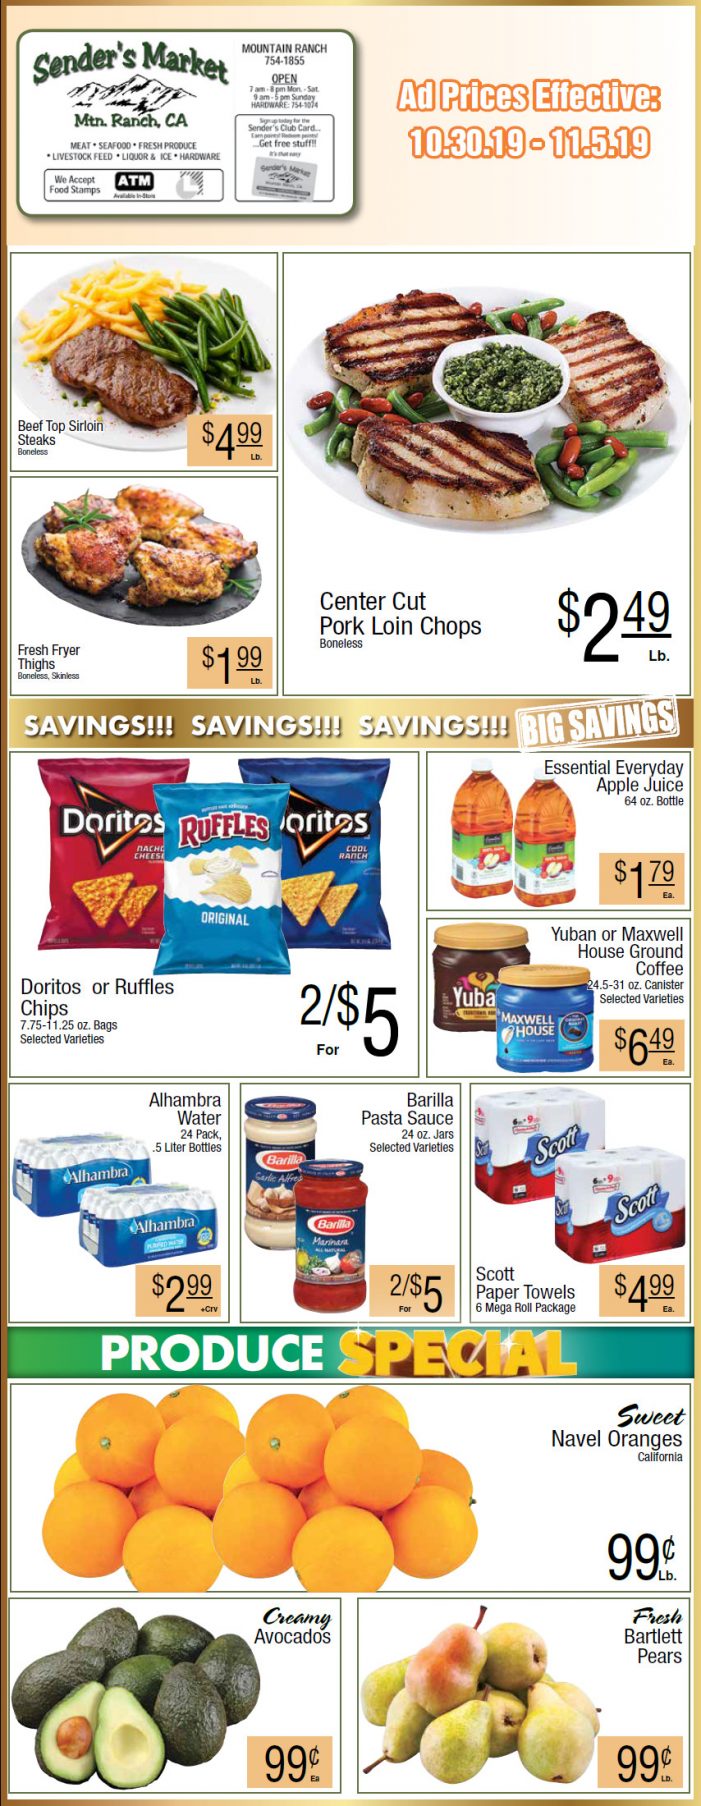 Sender’s Market Weekly Ad & Grocery Specials Through November 5th